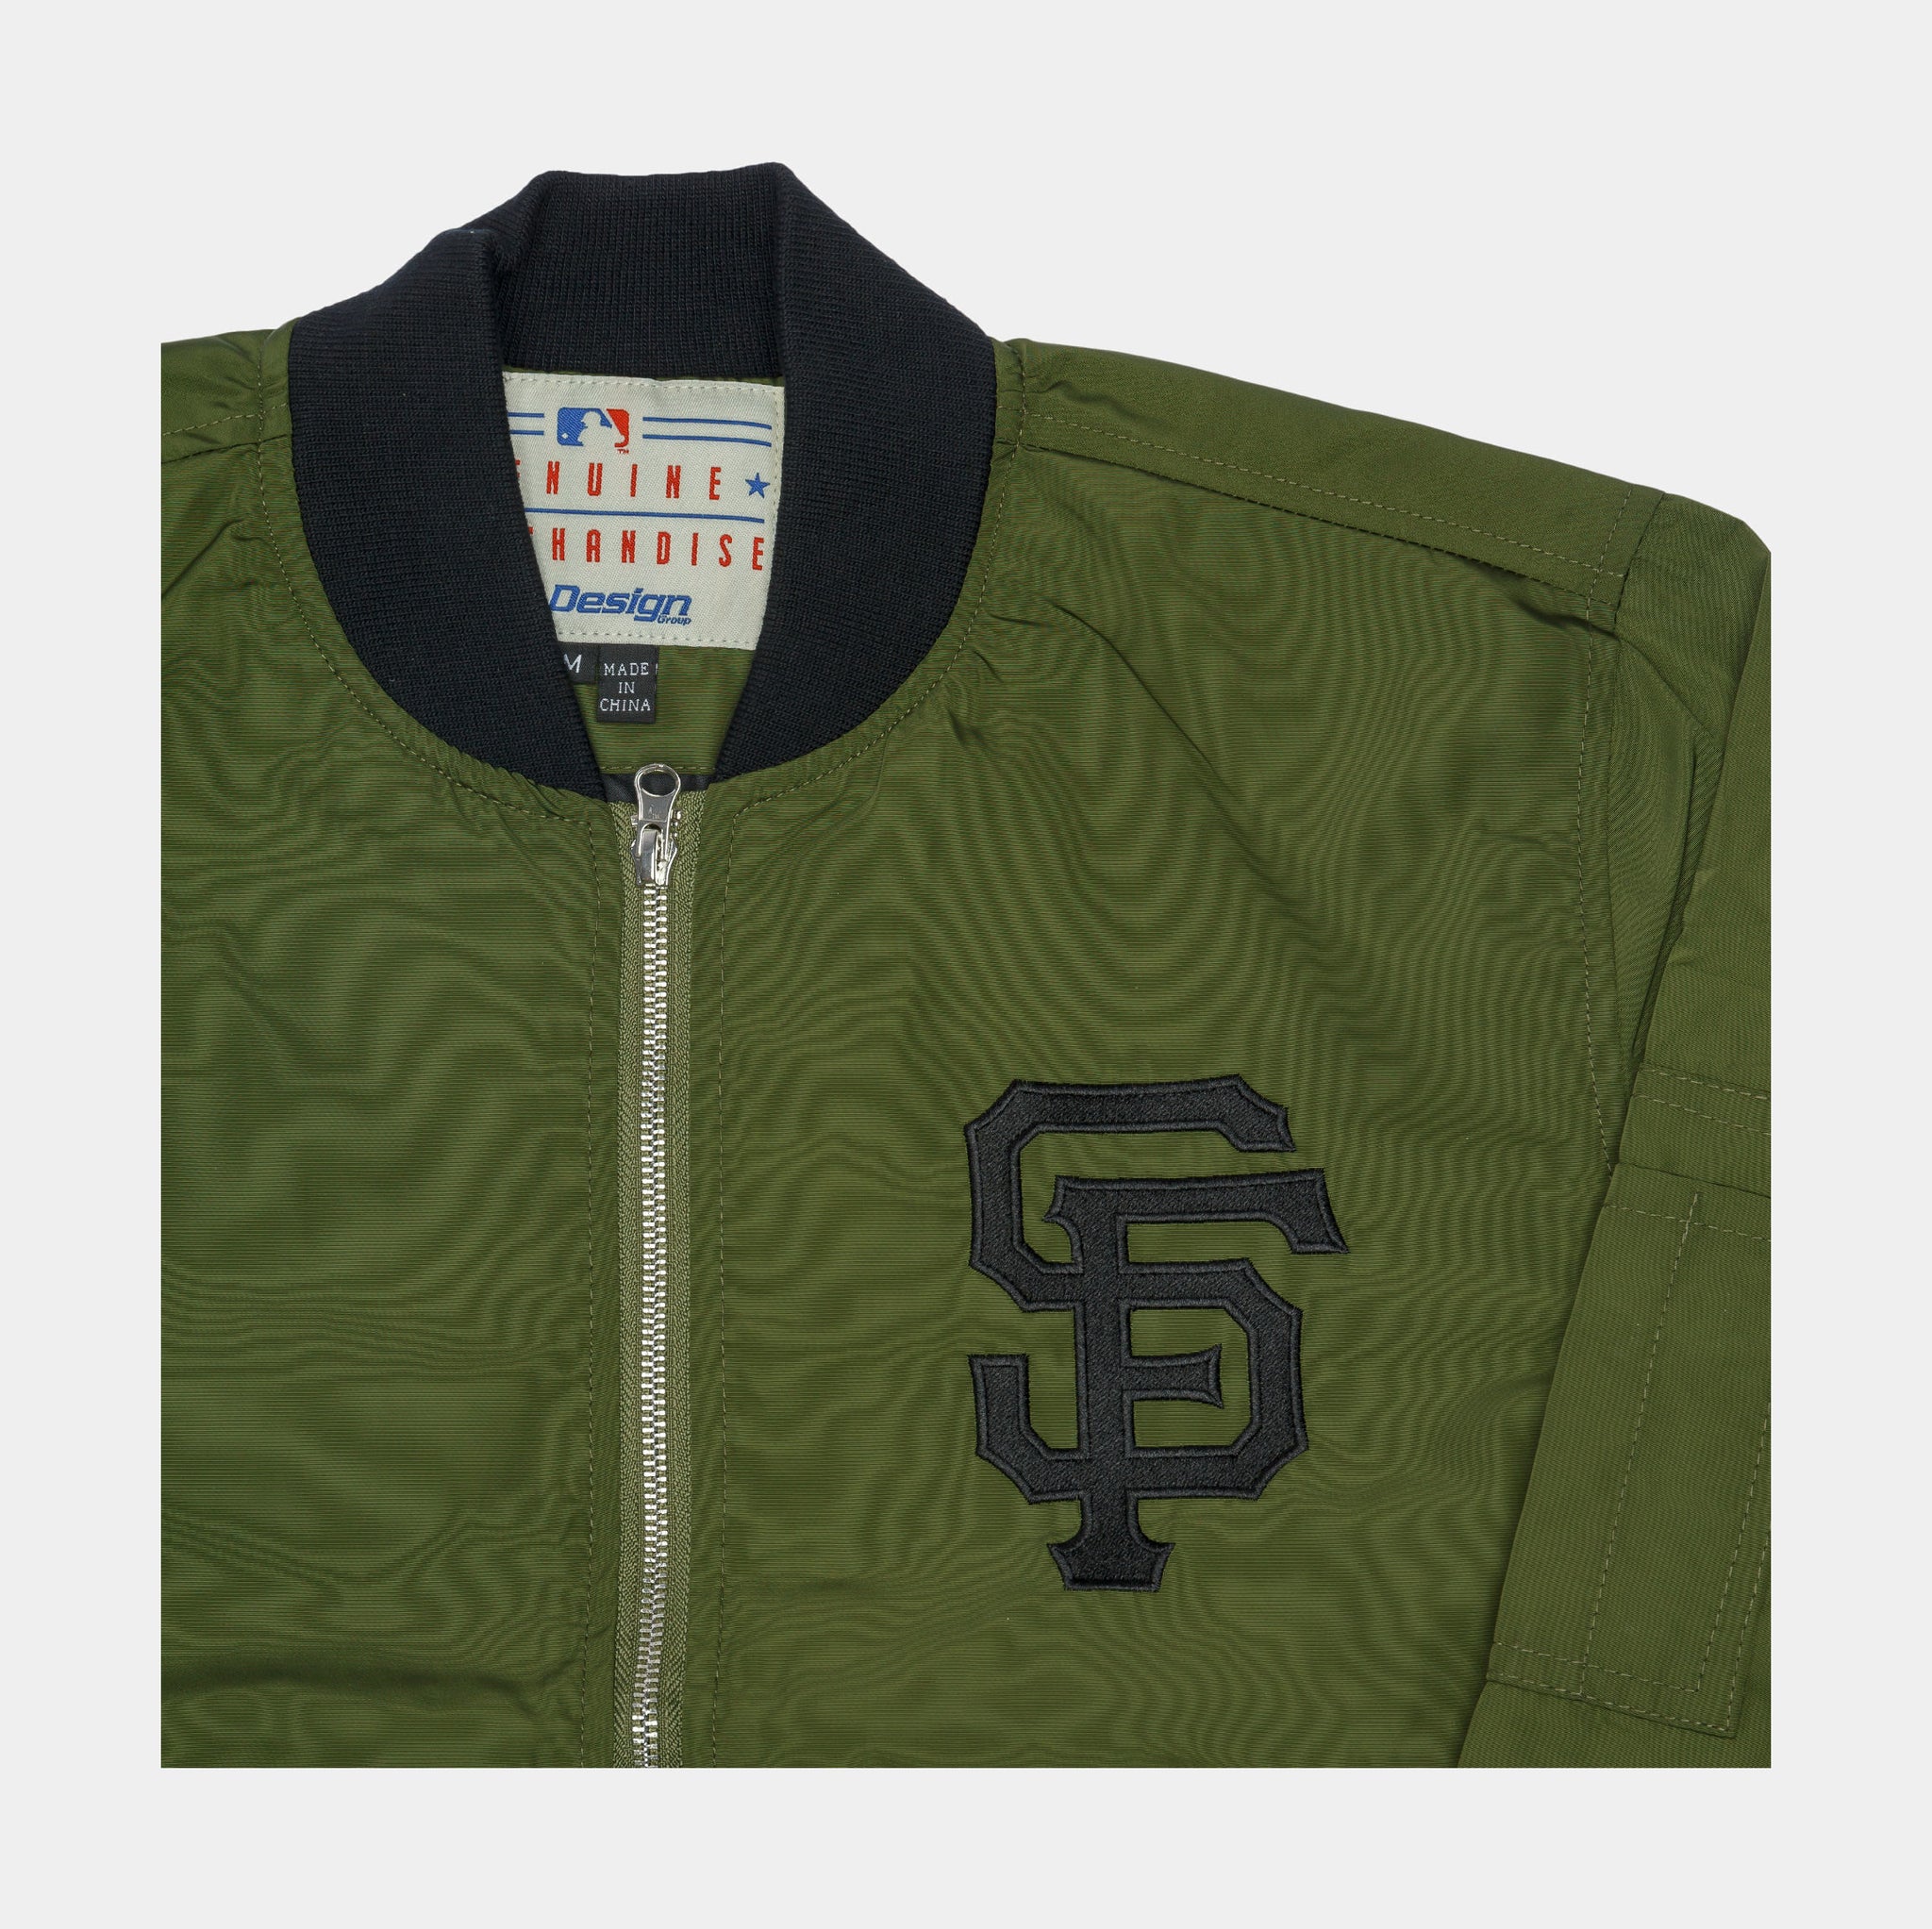 mitchell and ness san francisco giants jacket